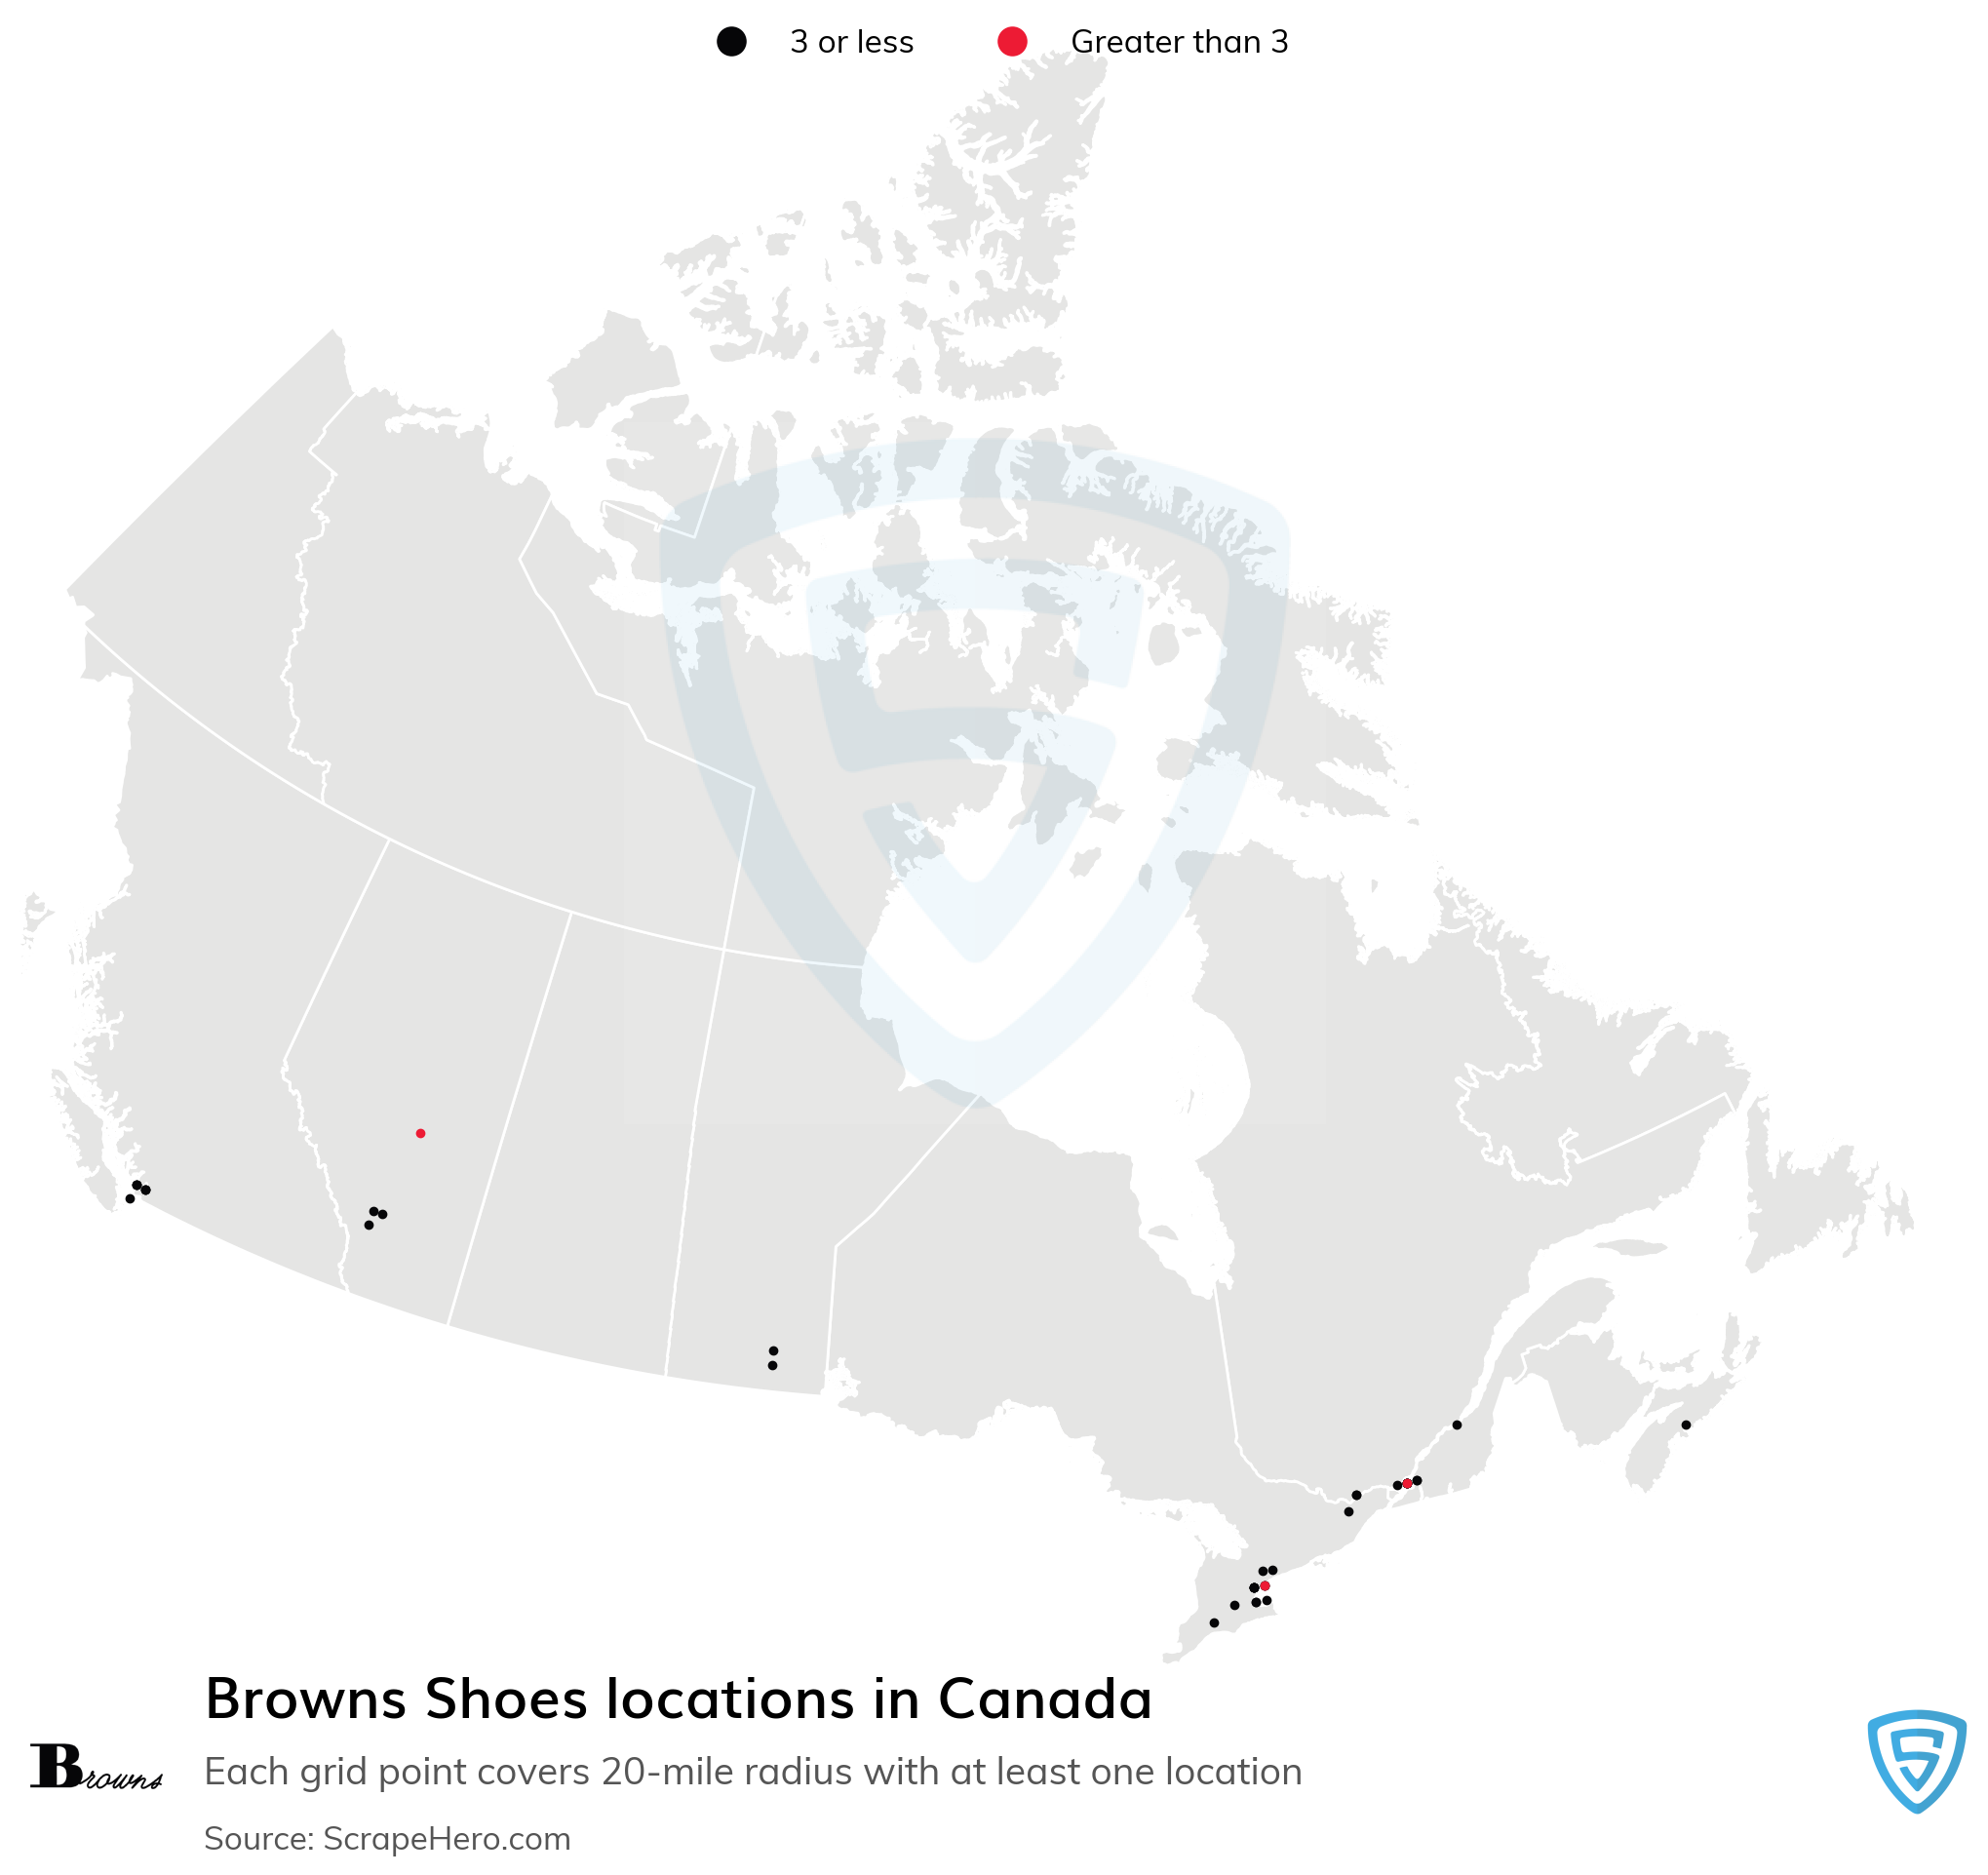 Number of Browns Shoes locations in Canada in 2023 | ScrapeHero